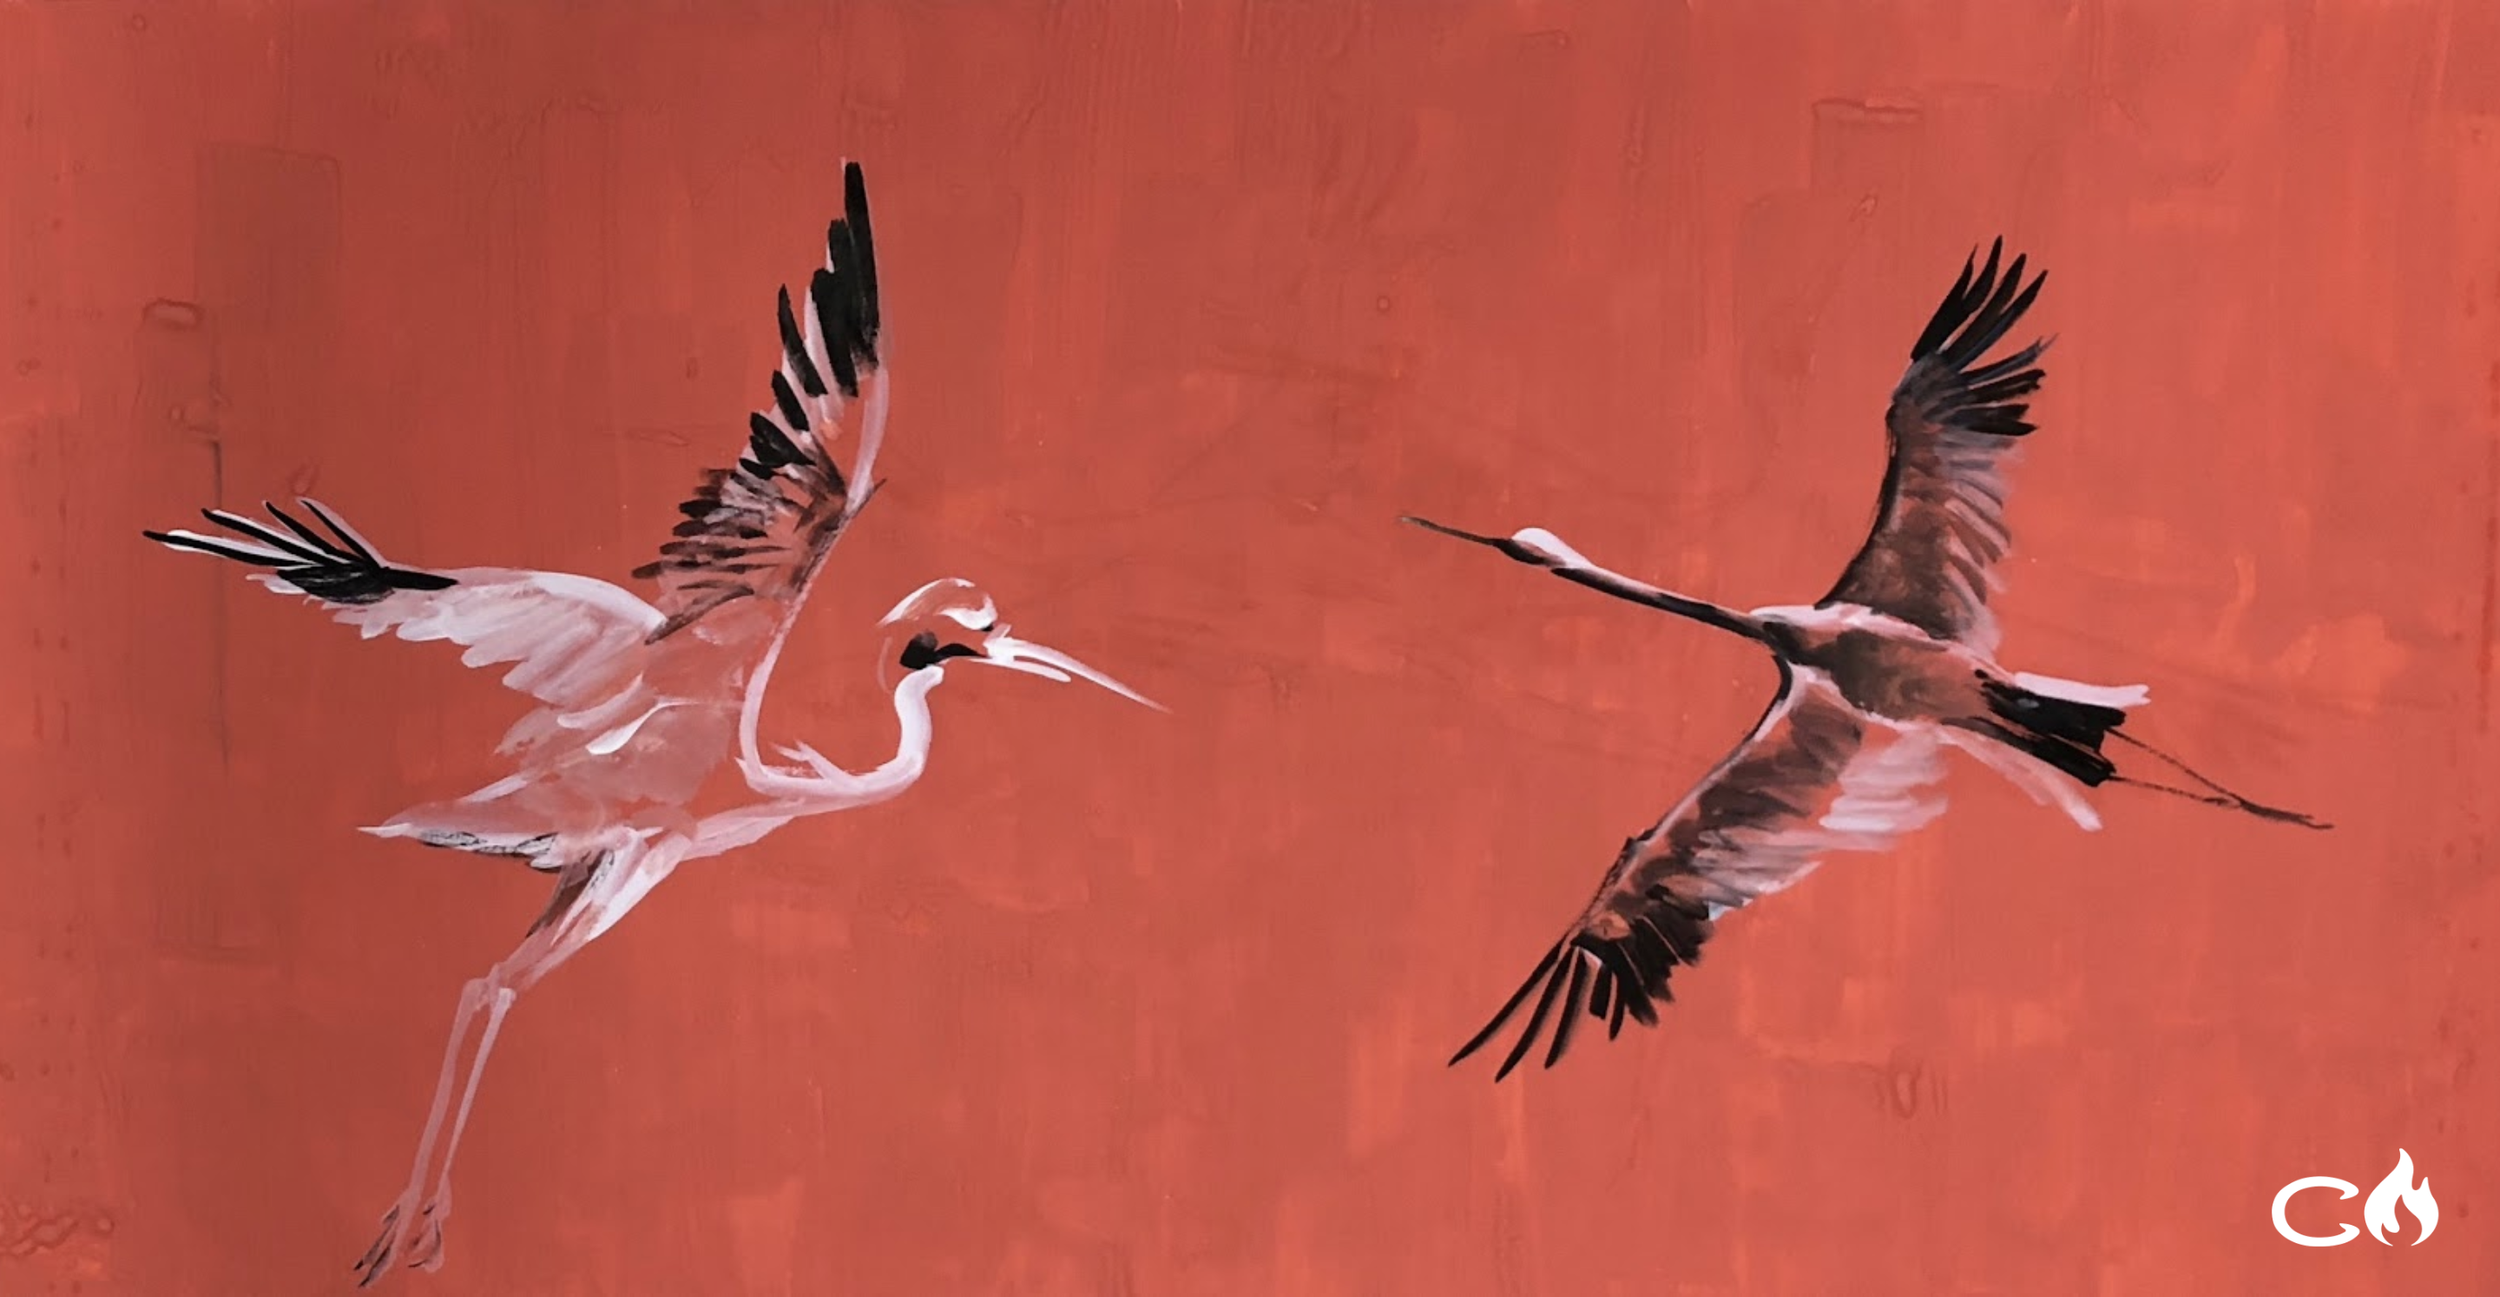 cFire_Cinabar_Red_China_Cranes_Ink_Brush_Source_Painting.png